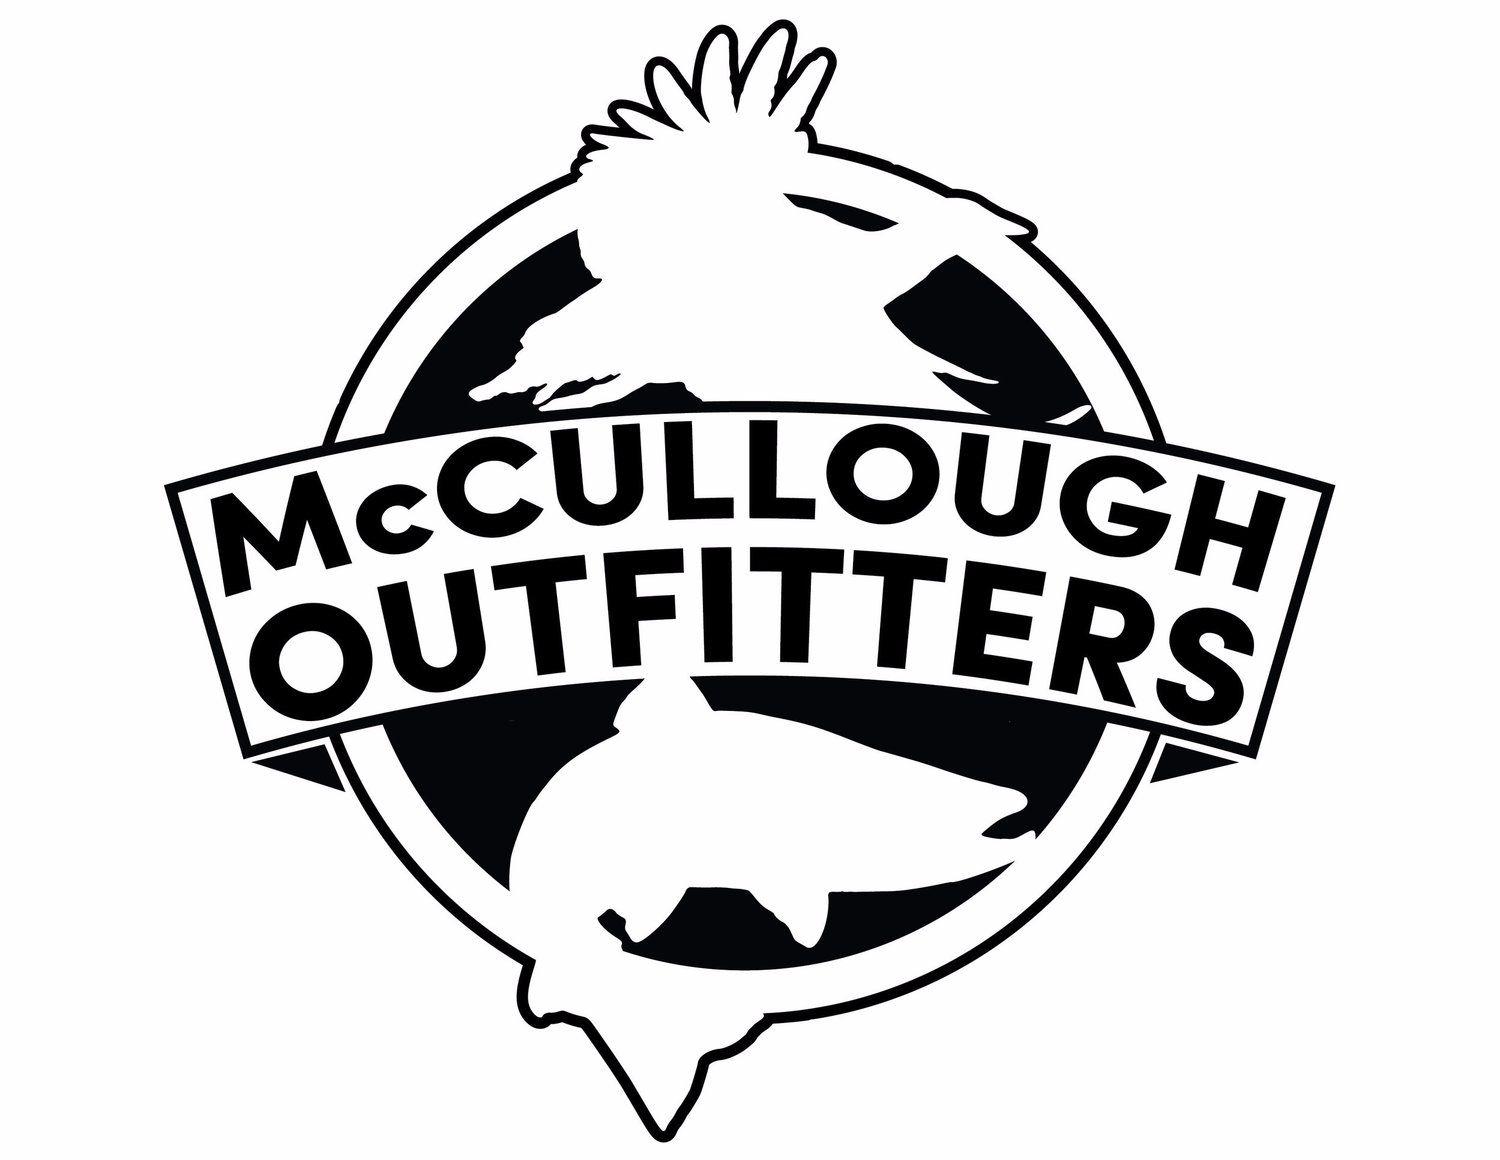 McCullough Logo - McCullough Outfitters